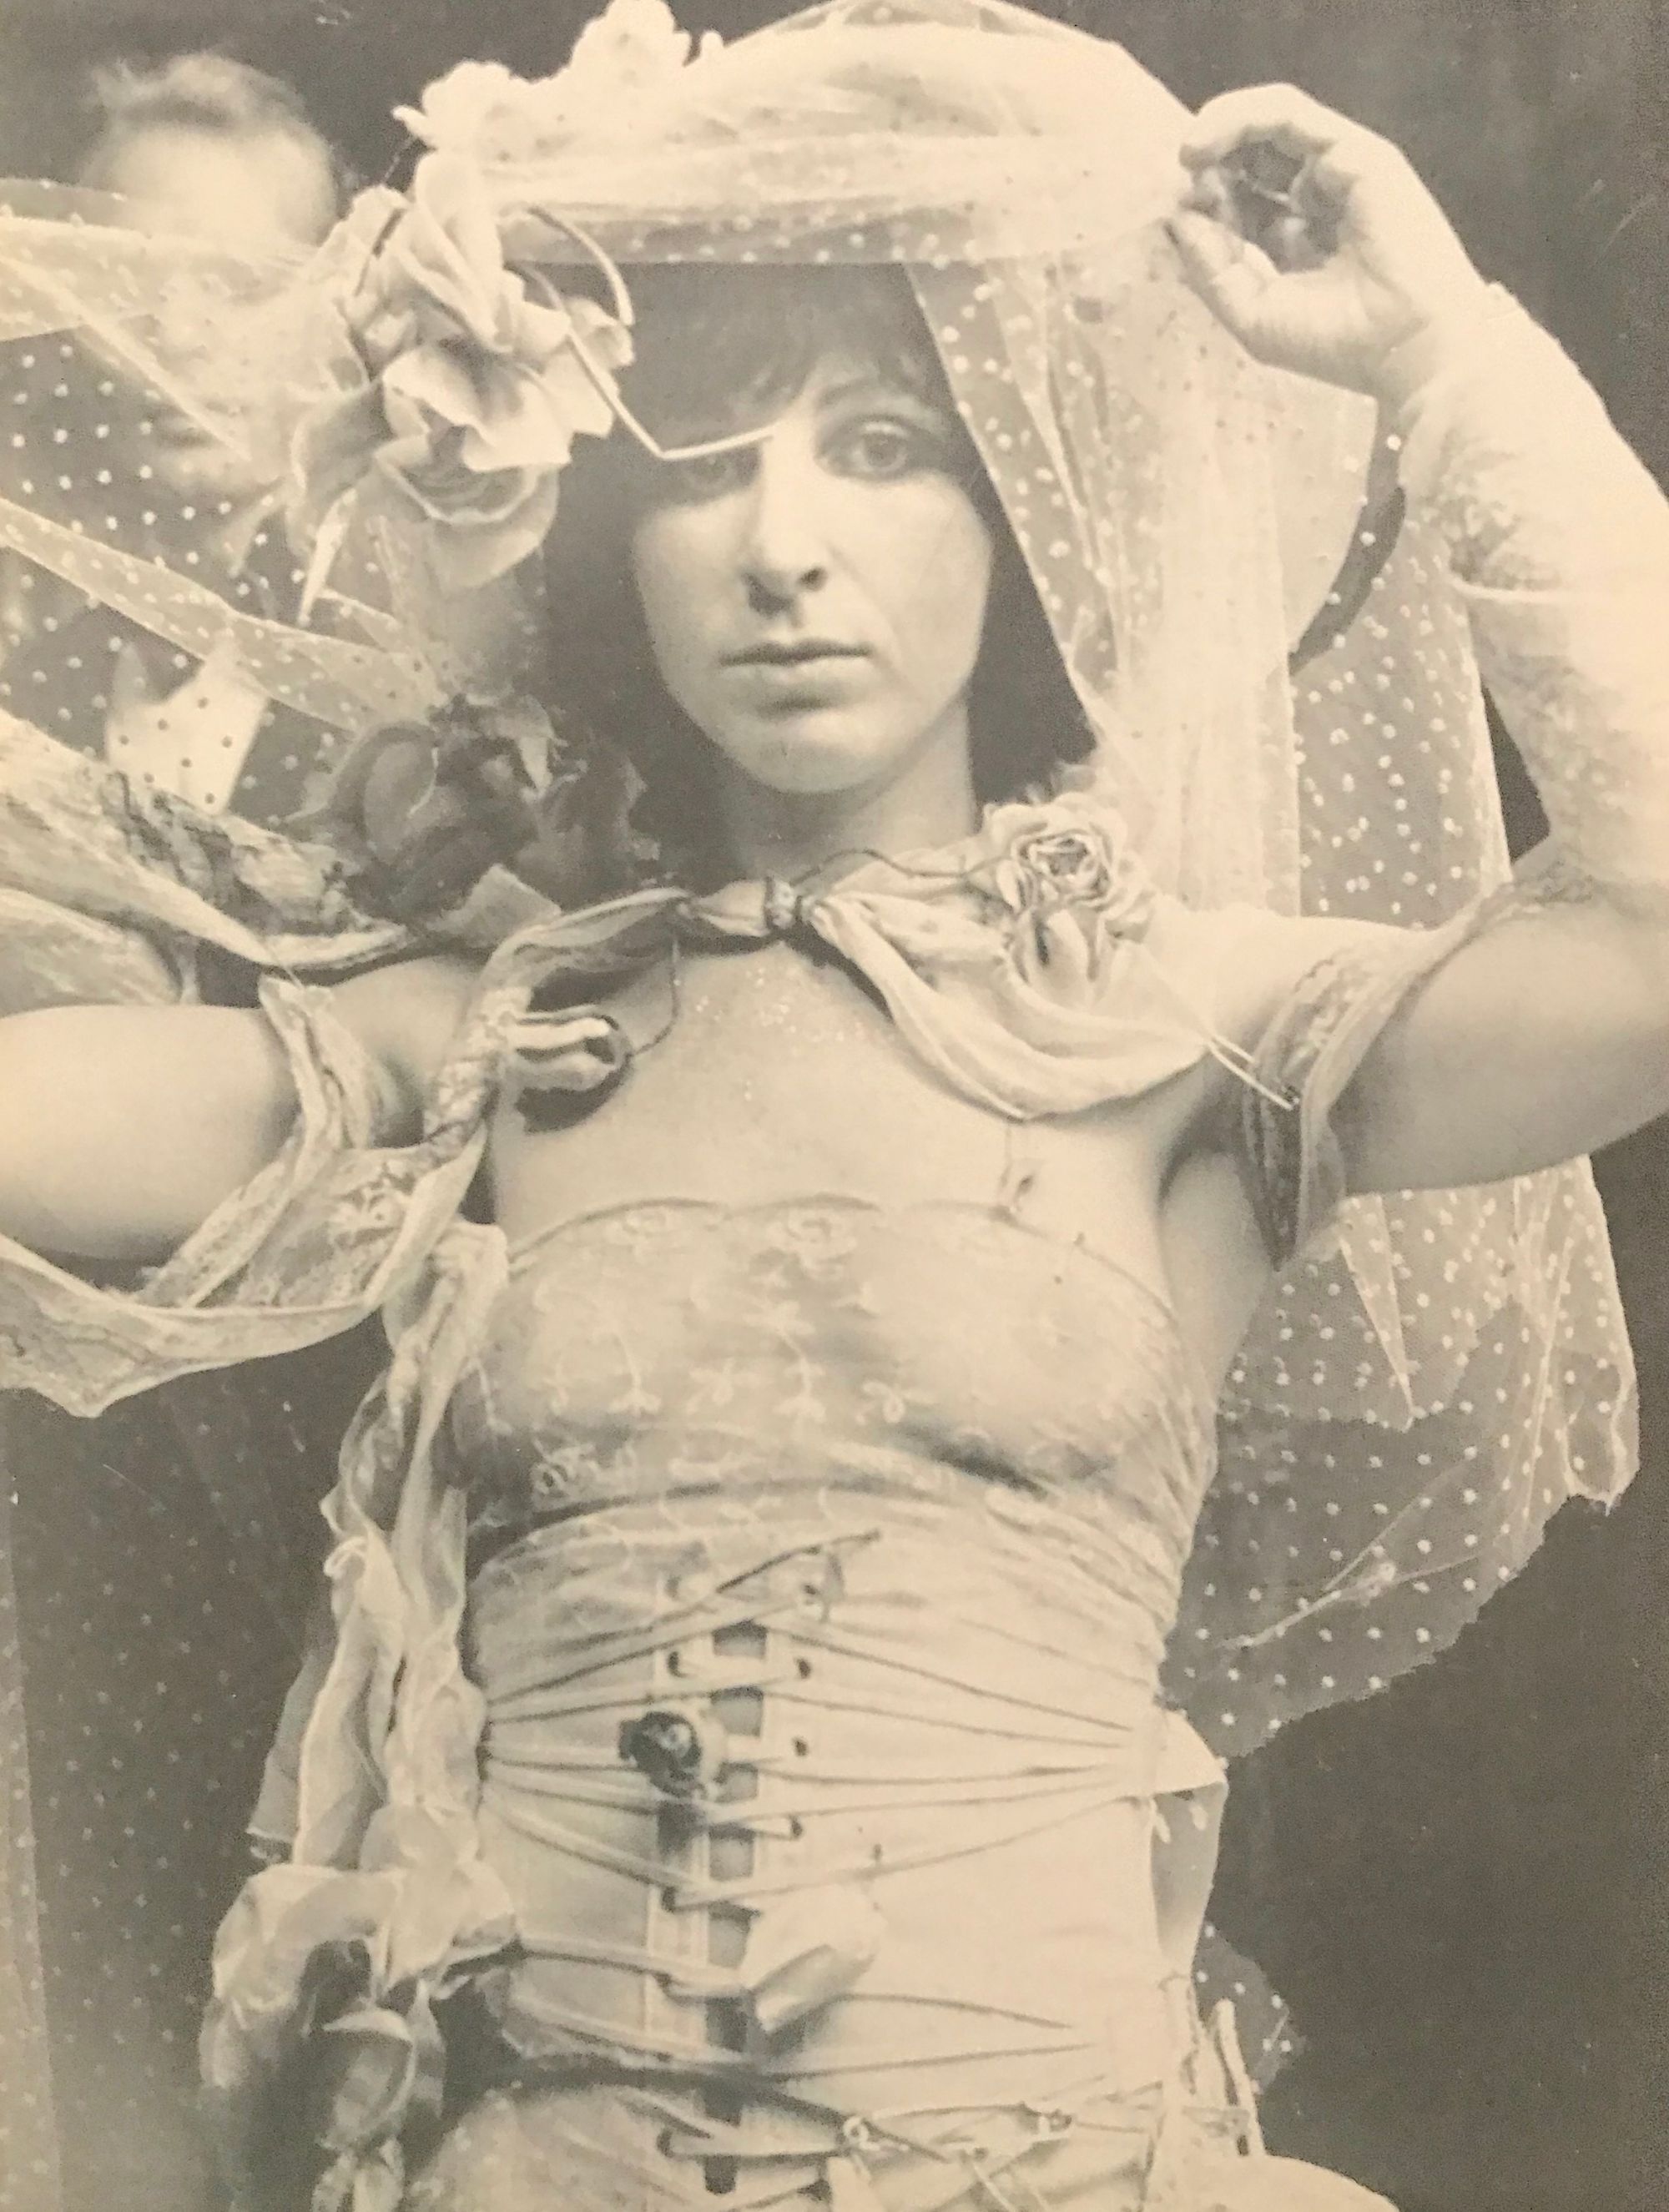 A faded black and white photograph of a woman covered in white lace, wearing a corset top.